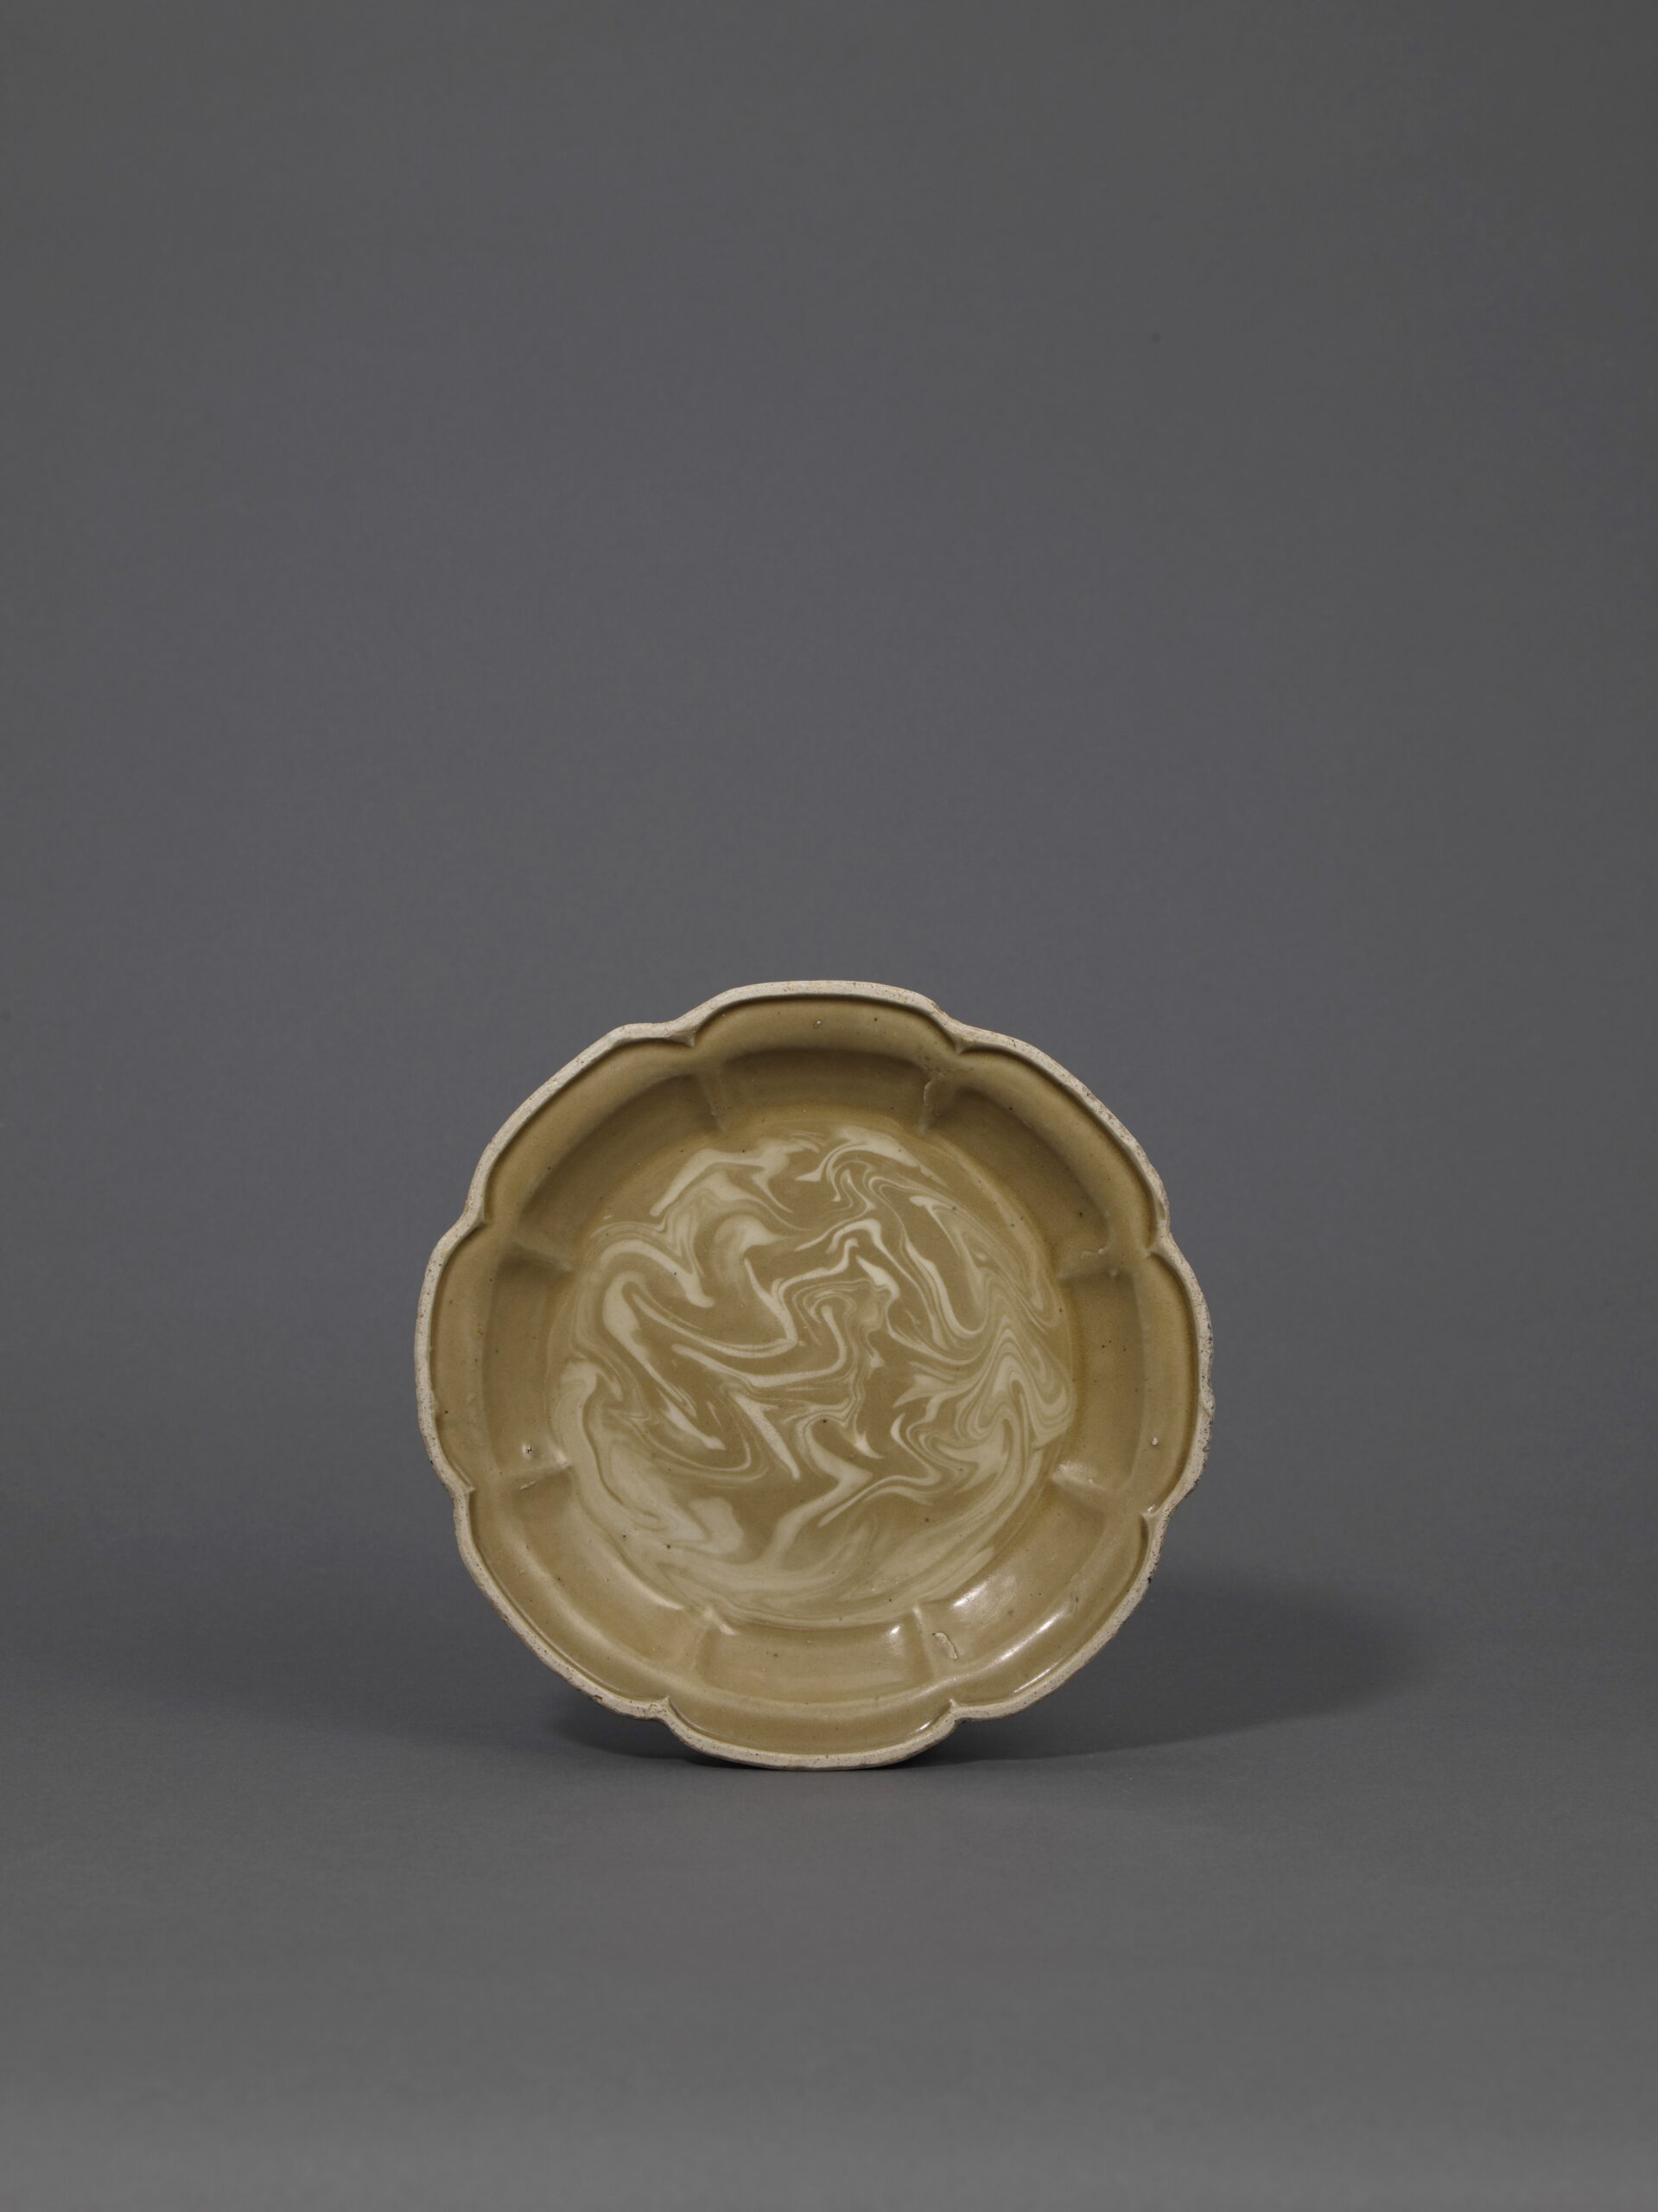 A very rare marble-glazed eight-lobed dish